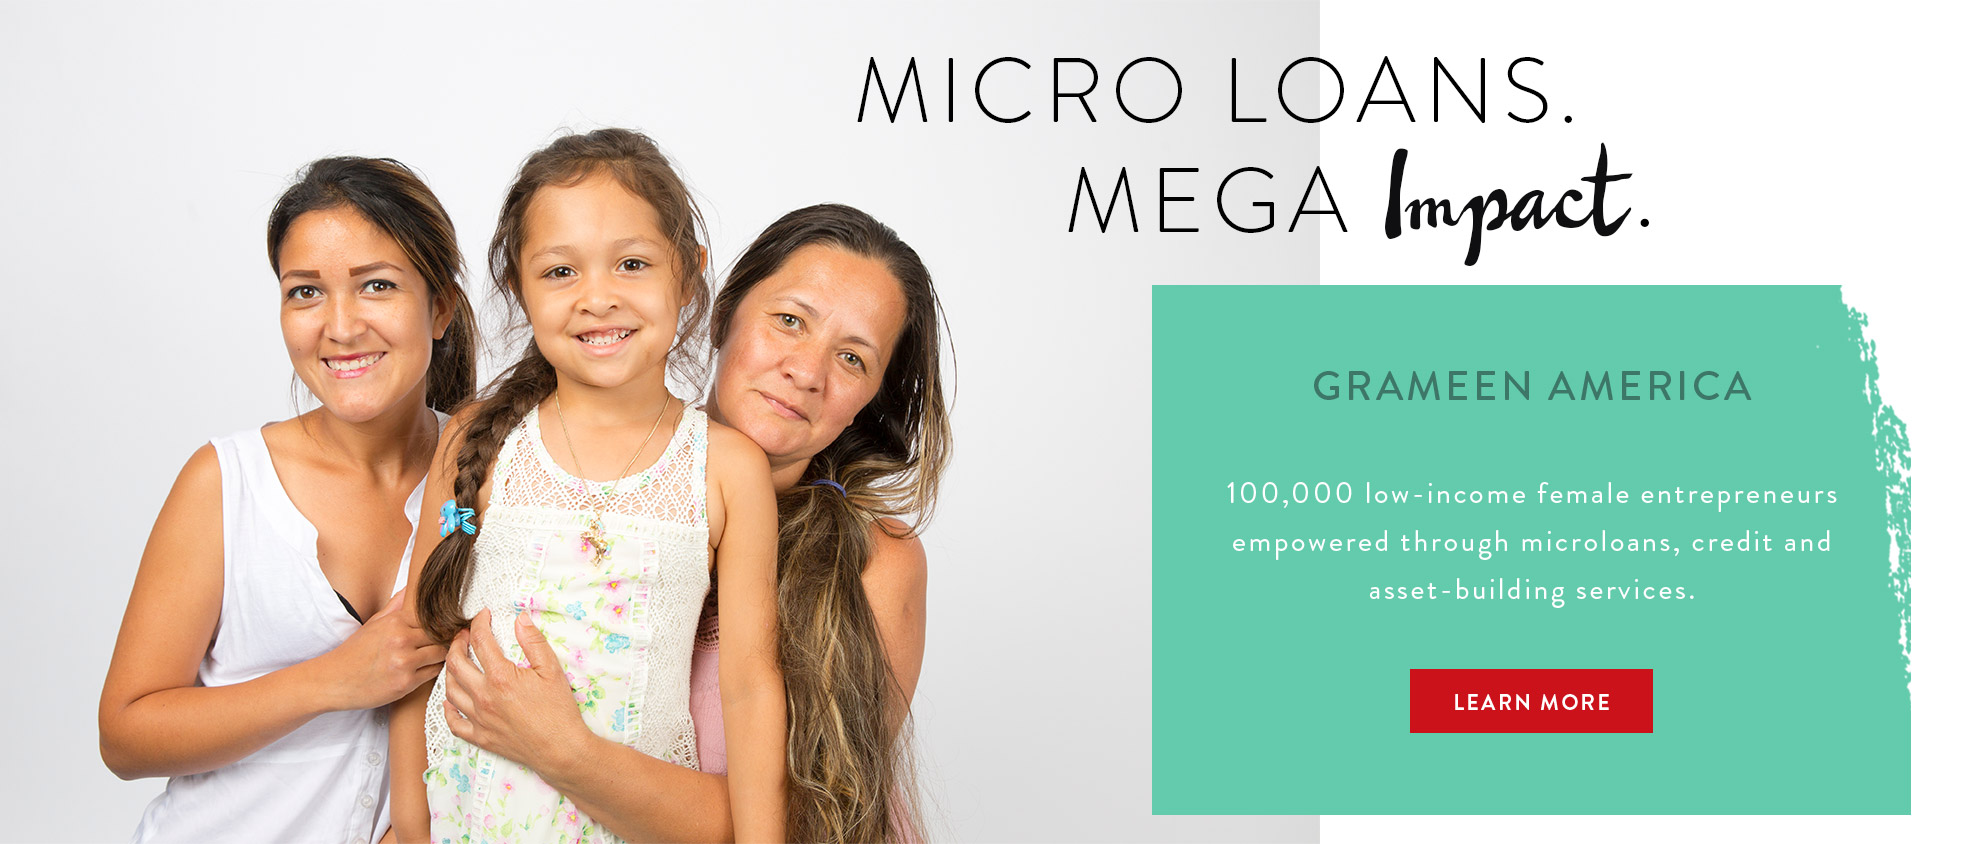 Micro Loans. Mega Impact. Grameen America: 100,000 low-income female entrepreneurs empowered through microloans, credit and asset-building services. LEARN MORE.